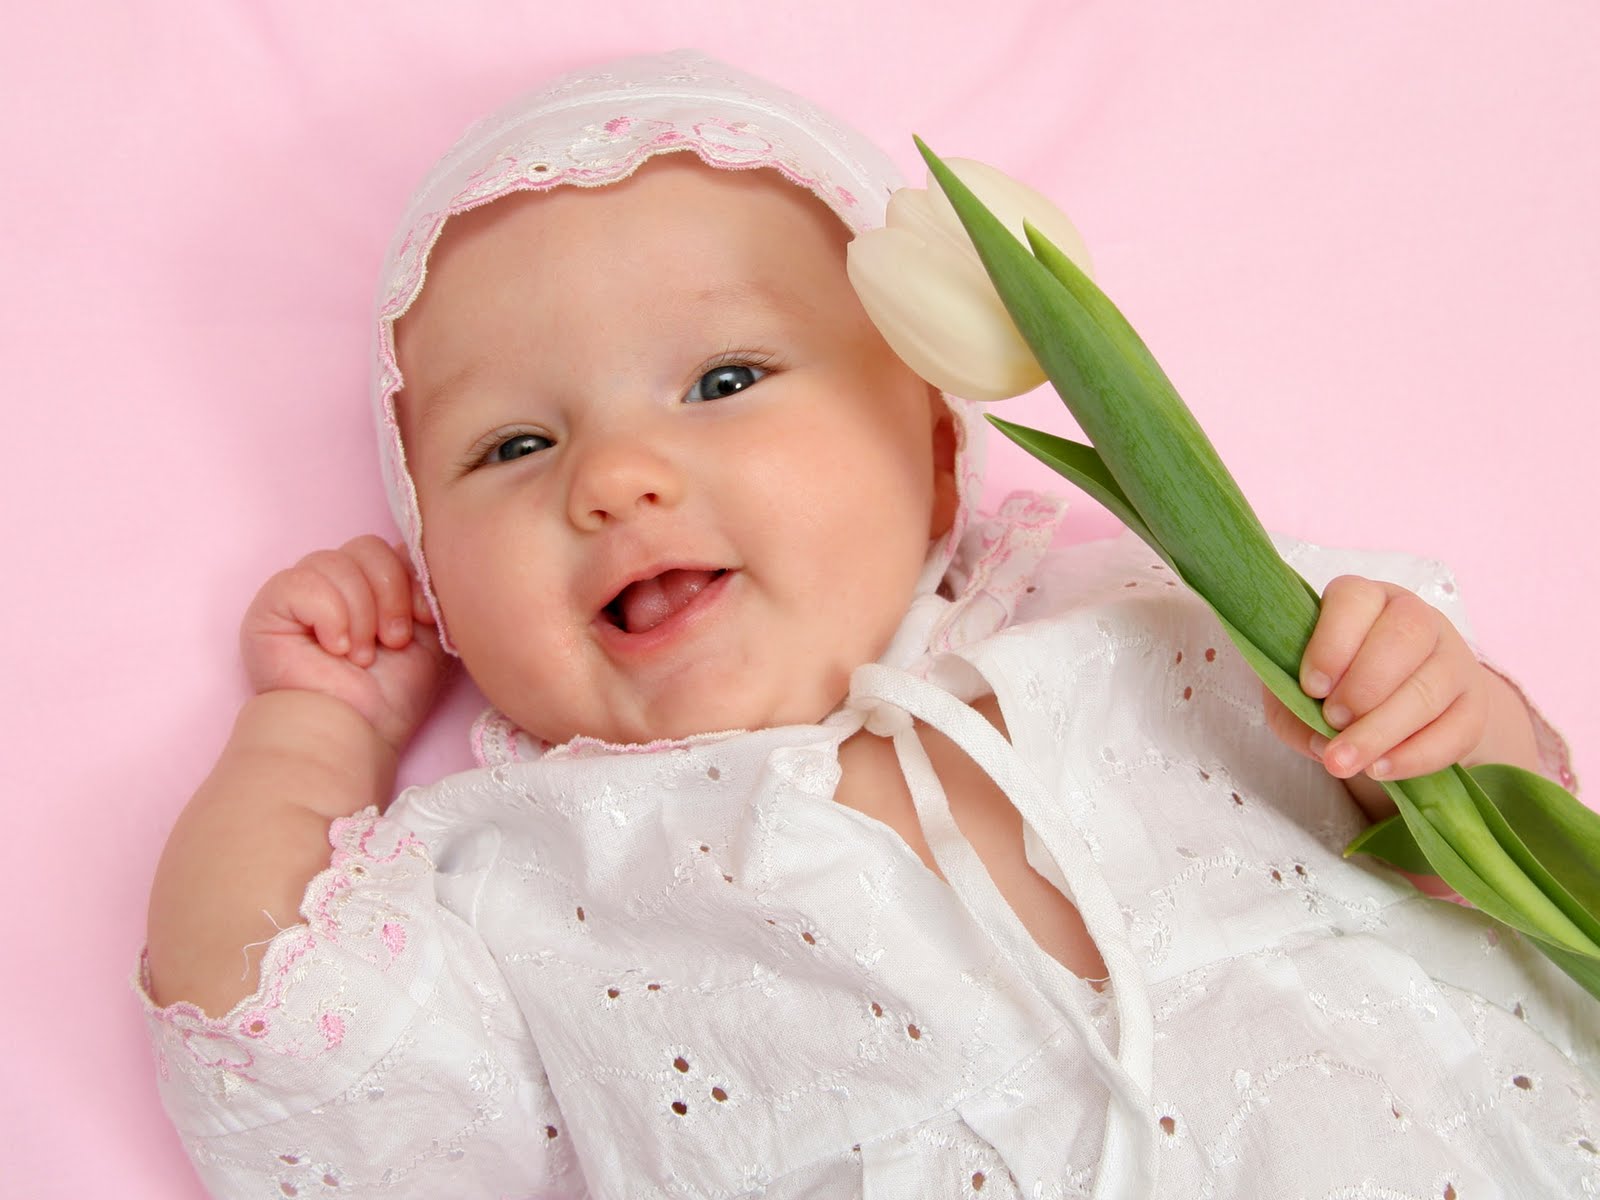  Baby  wallpapers  for desktop  animation The Free Images